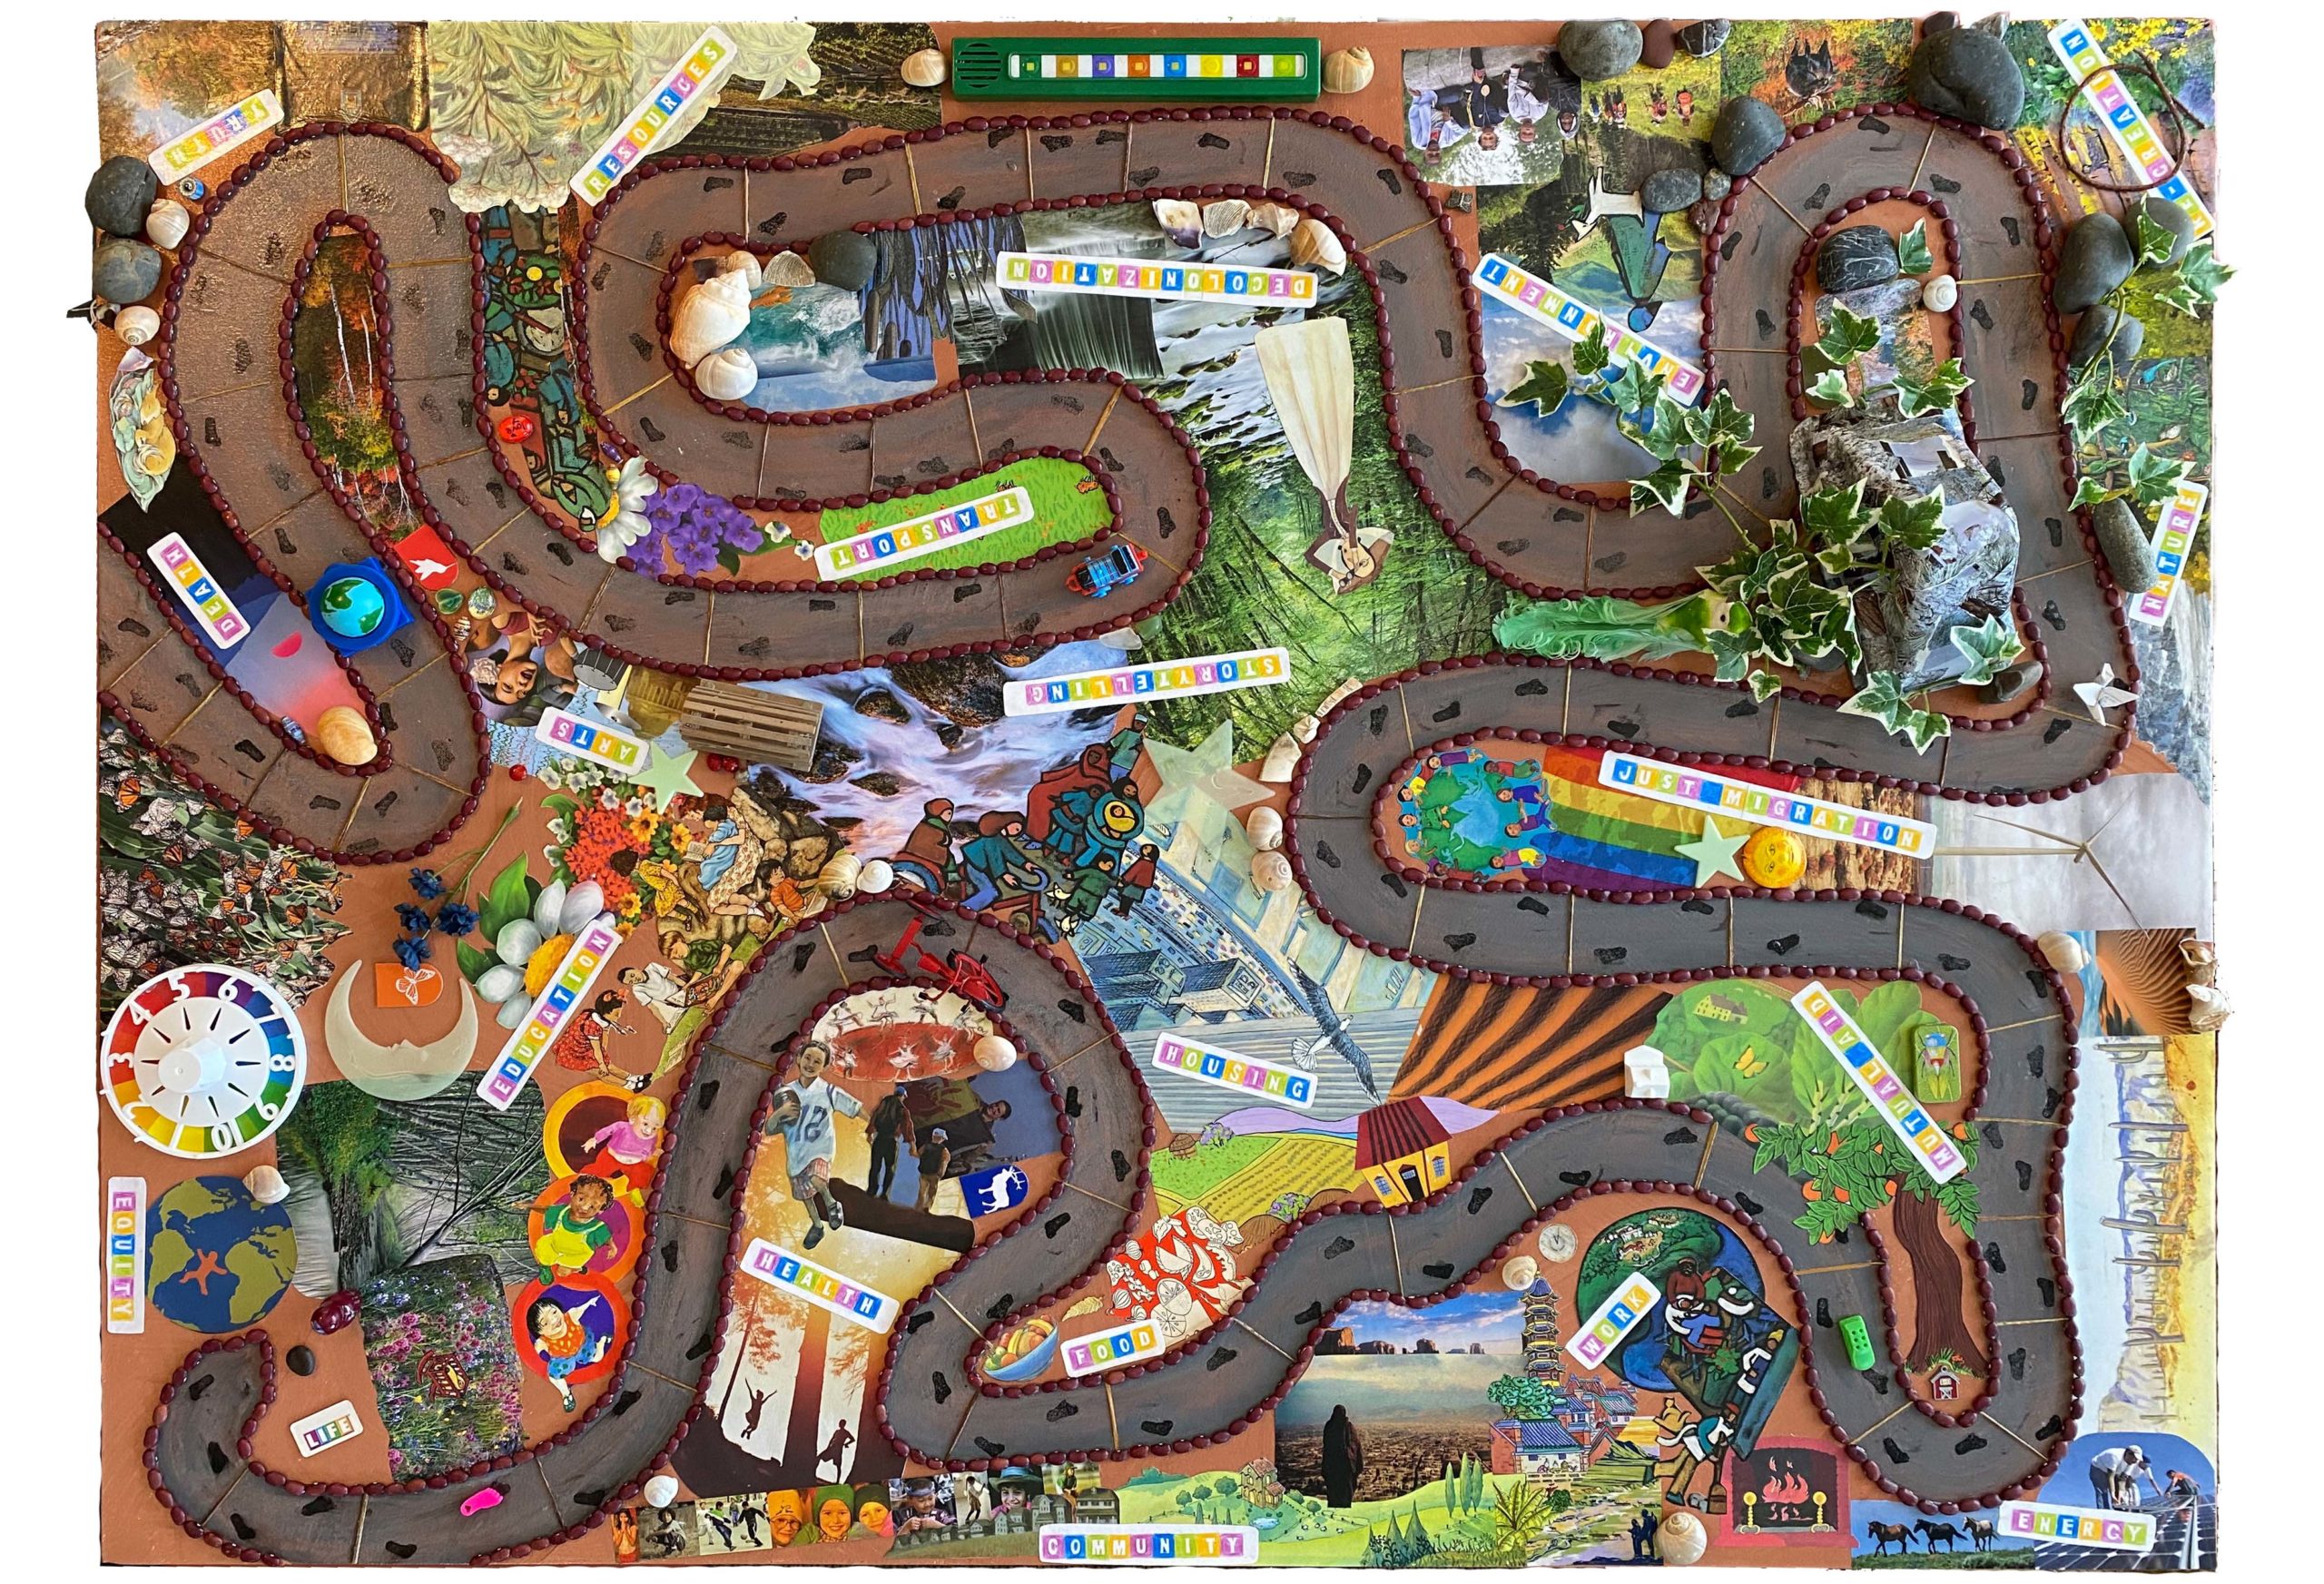 the game of life board layout